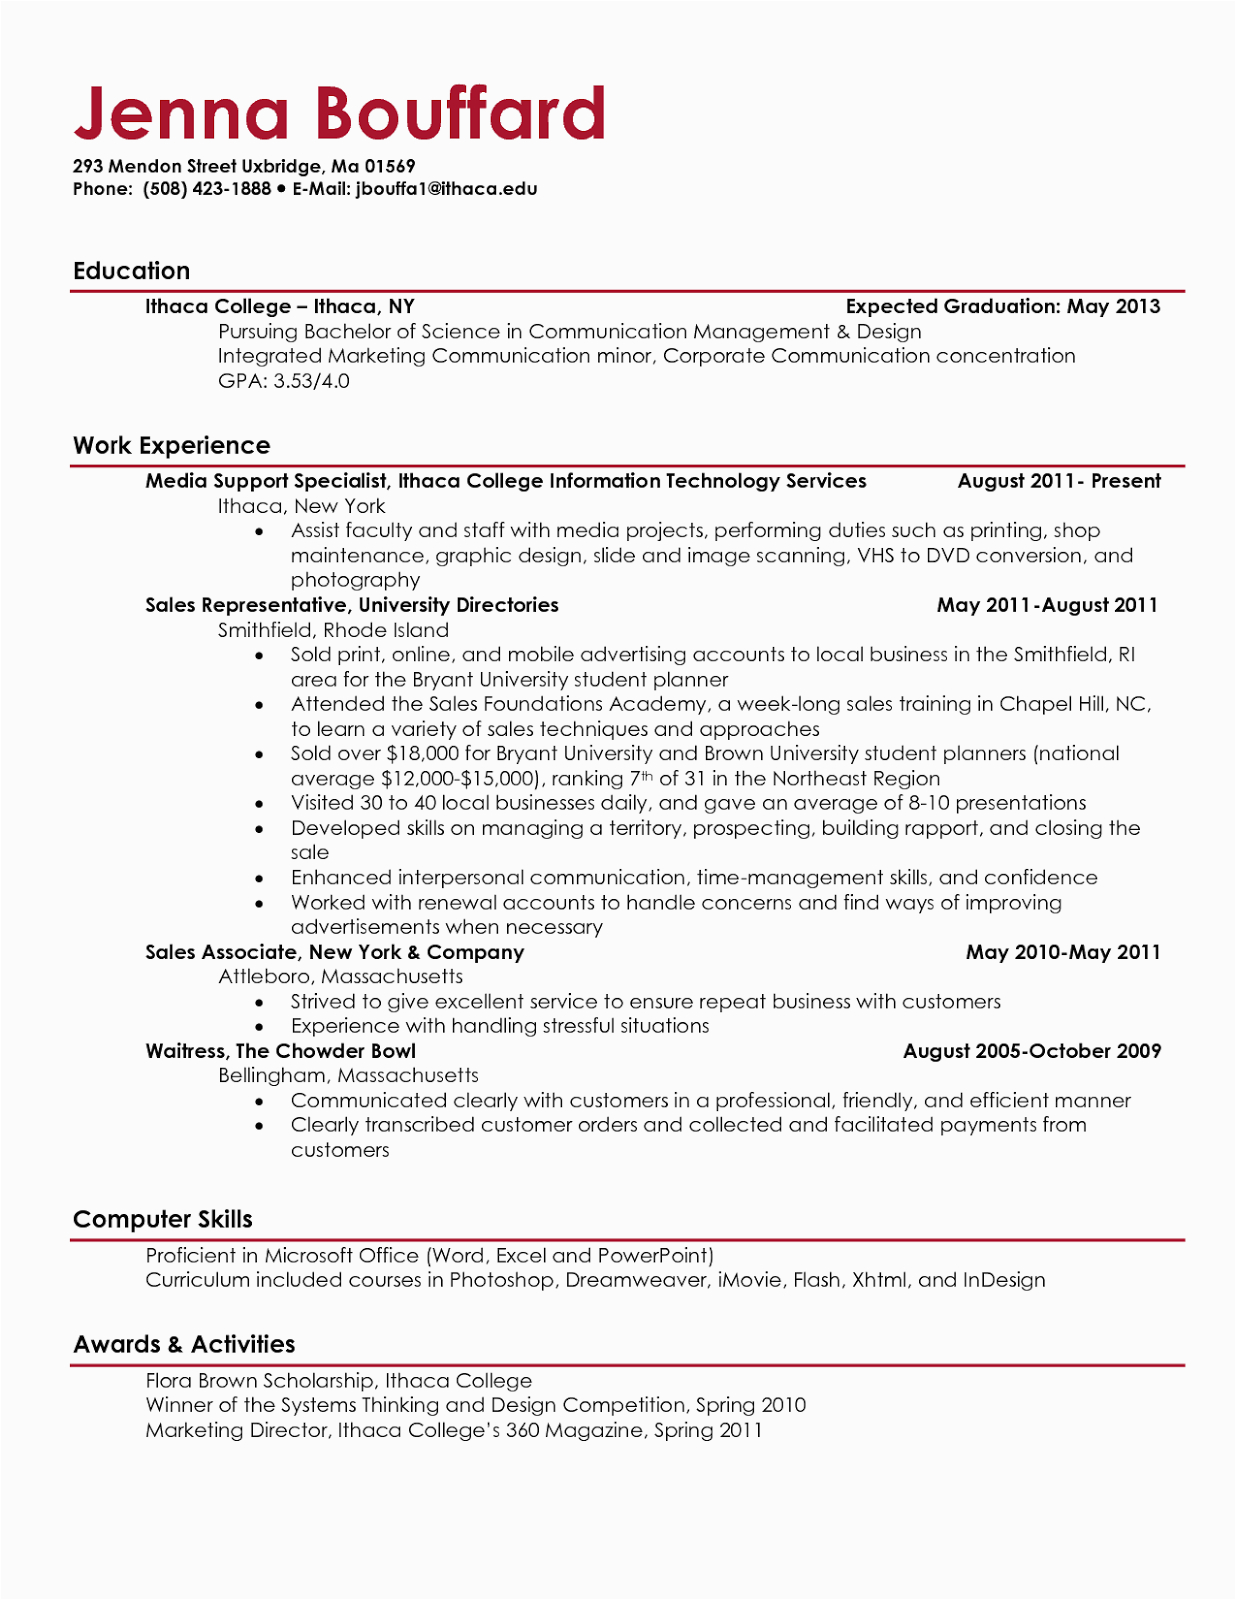 Sample Resume Templates for College Students Samples Of Resumes for College Students